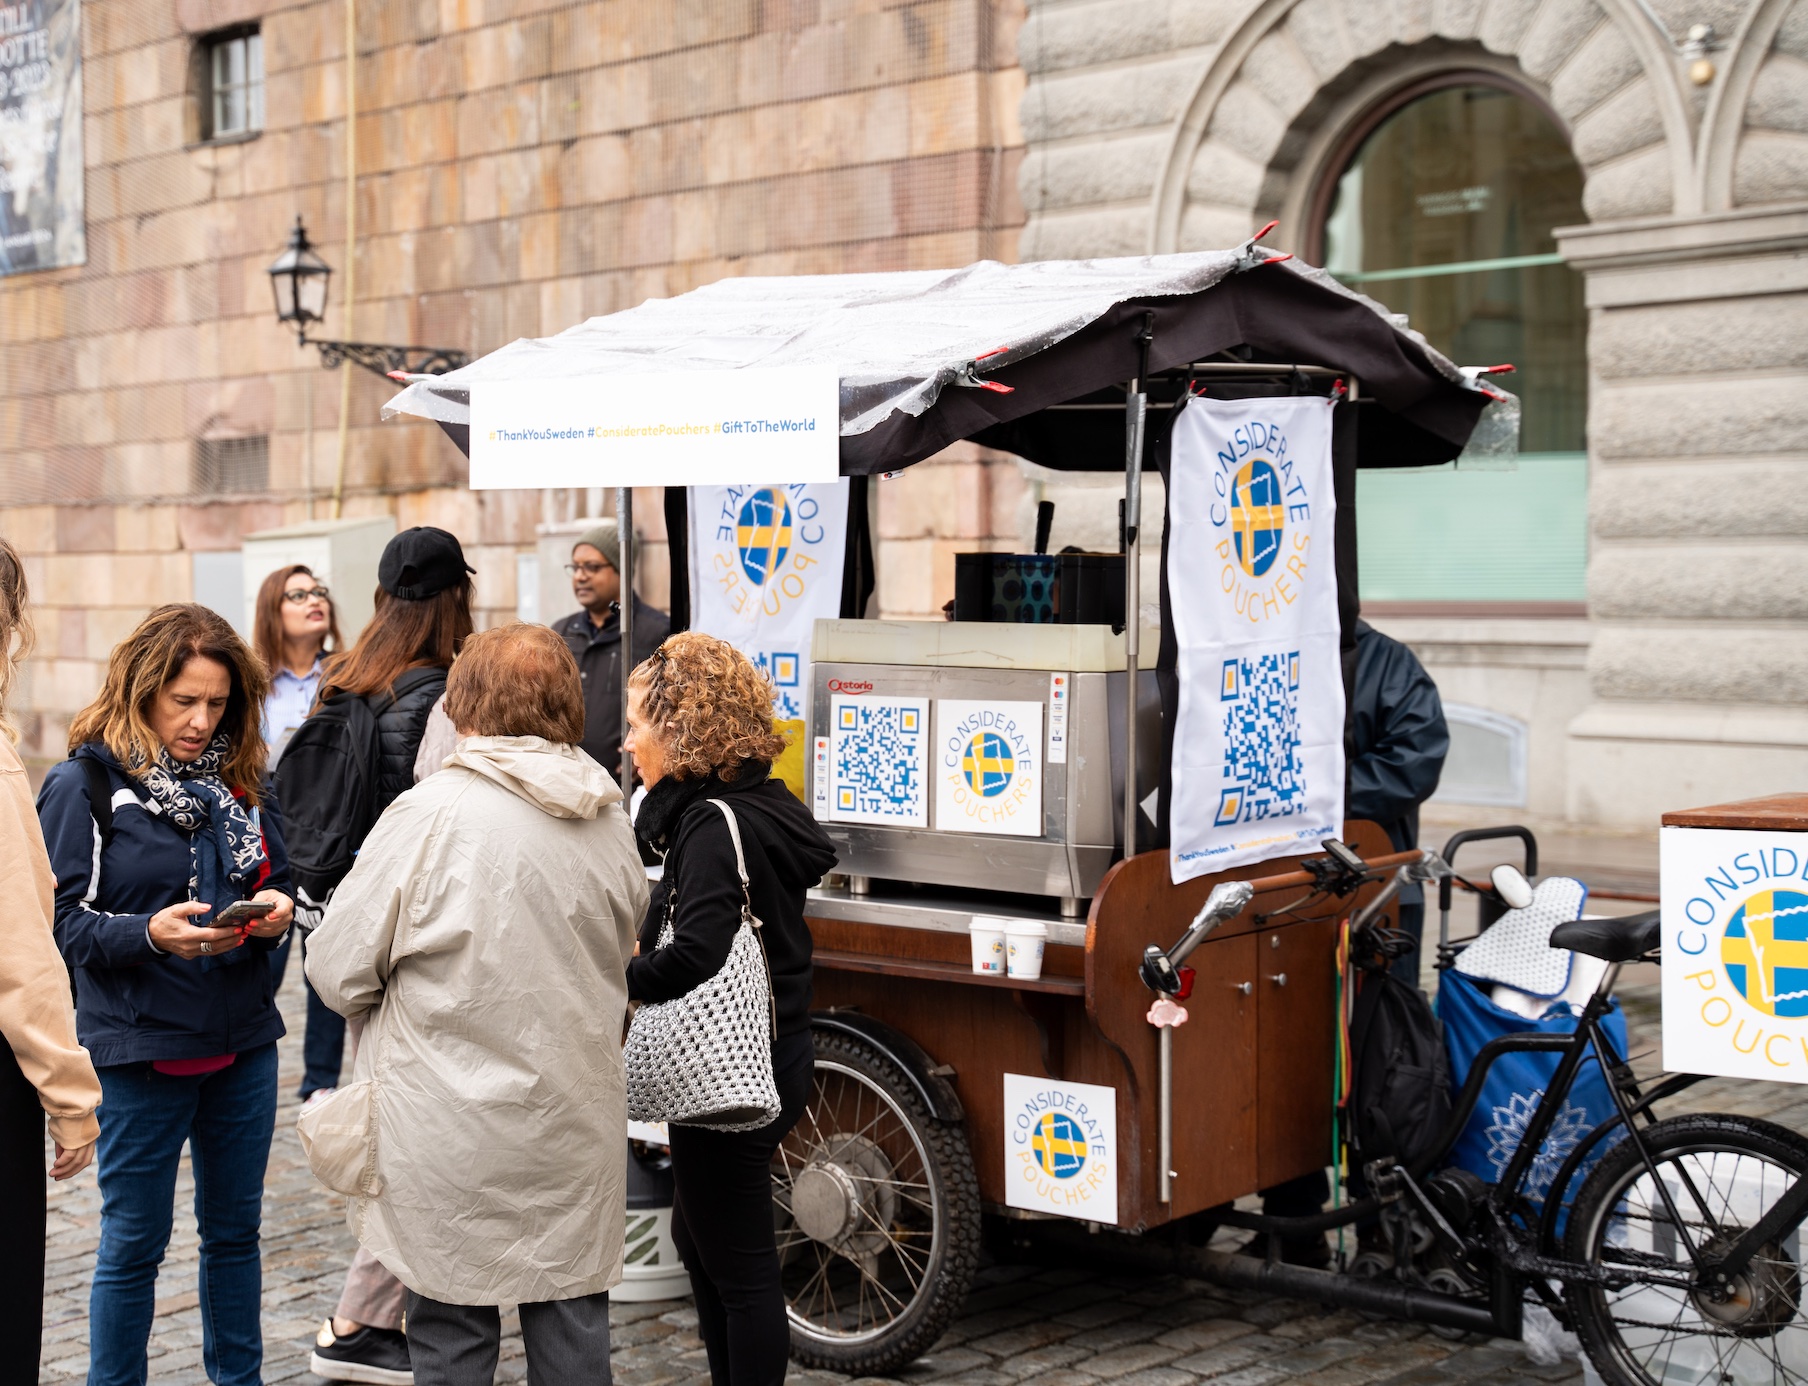 Considerate Pouchers' coffee and cake cart for sharing fika; image courtesy of Considerate Pouchers.